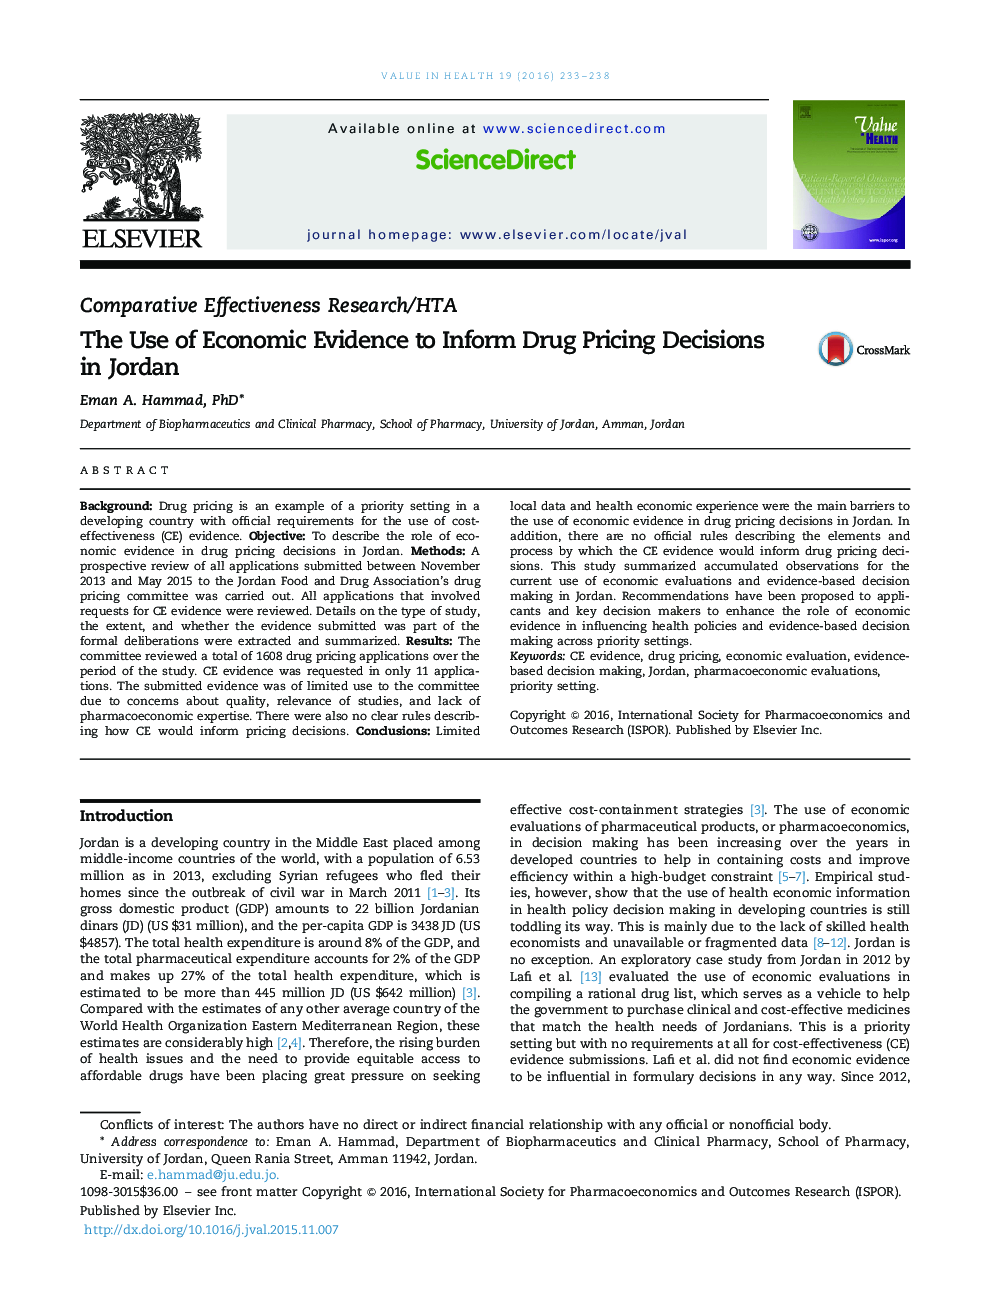 The Use of Economic Evidence to Inform Drug Pricing Decisions in Jordan